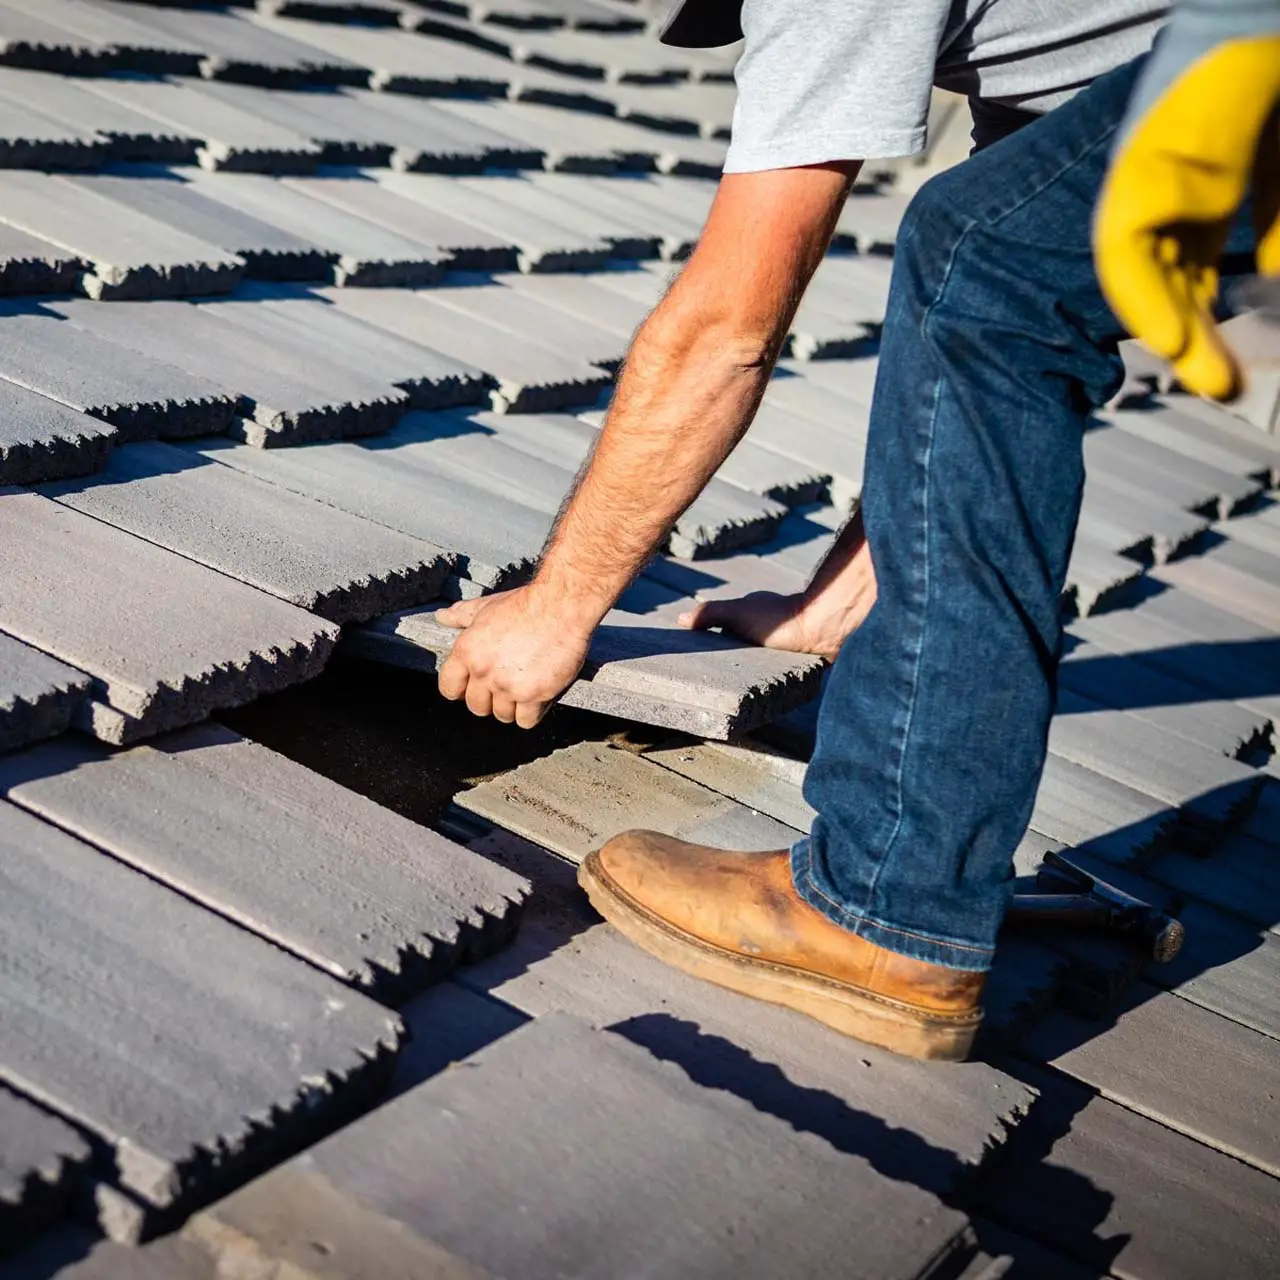 8 Signs Your Roof Needs Emergency Repairs